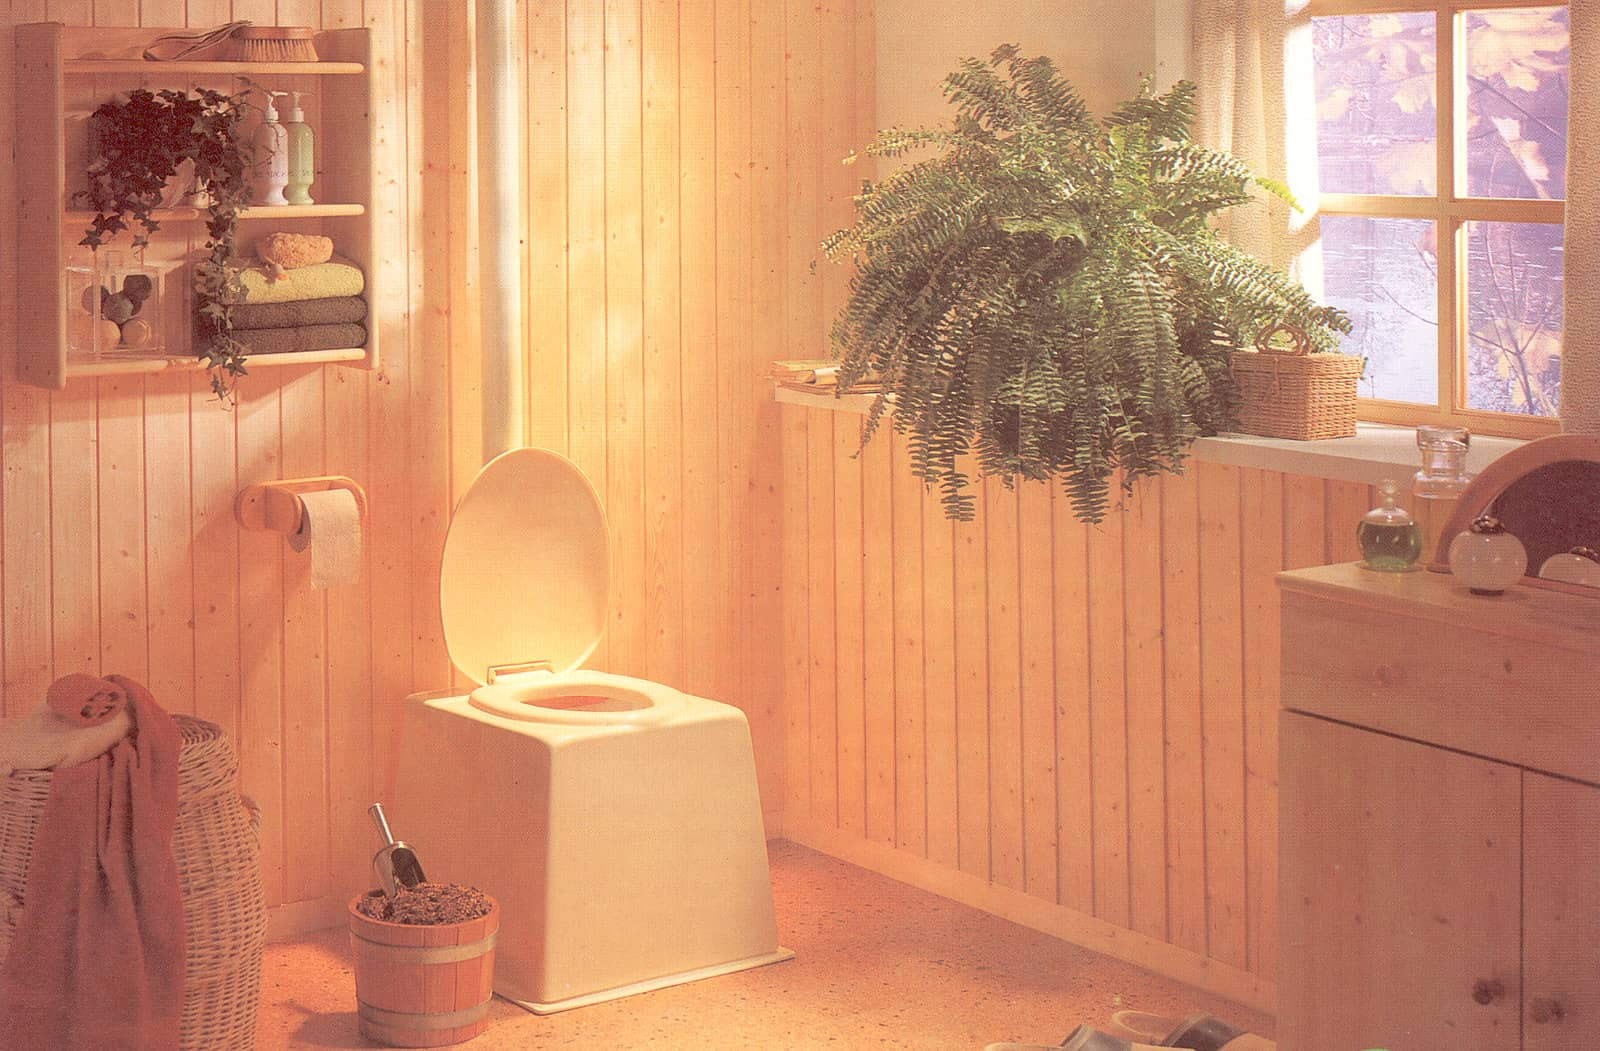 A compost toilet in a house 